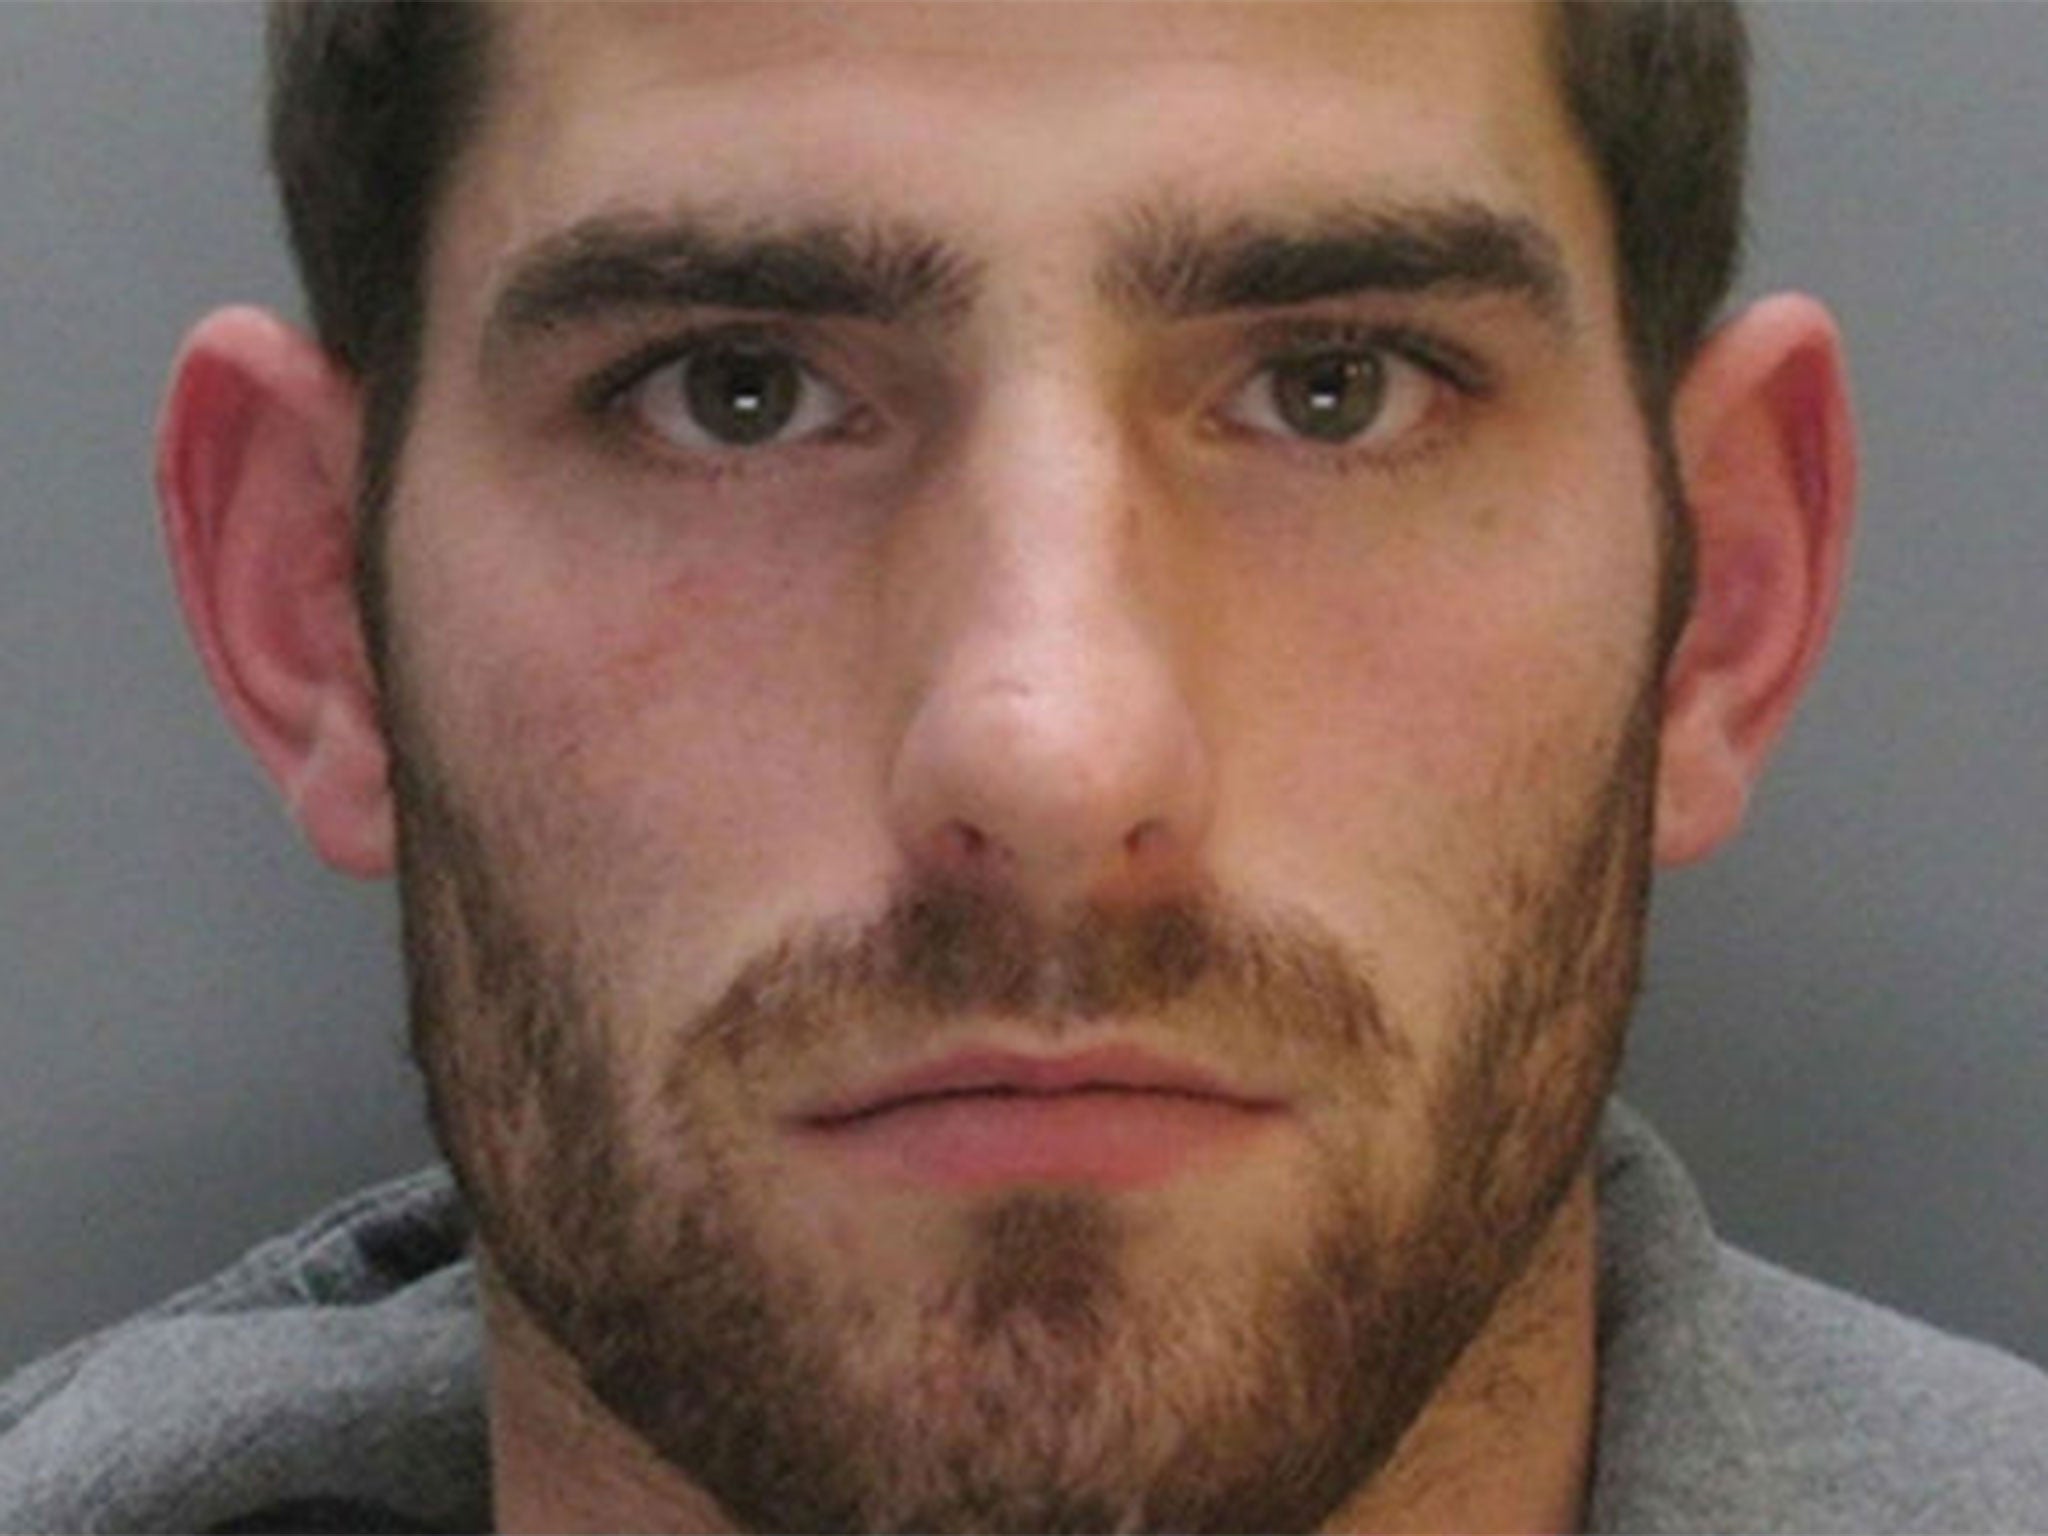 The Attoney General has ordered an investigation into the website set up to support shamed footballer Ched Evans